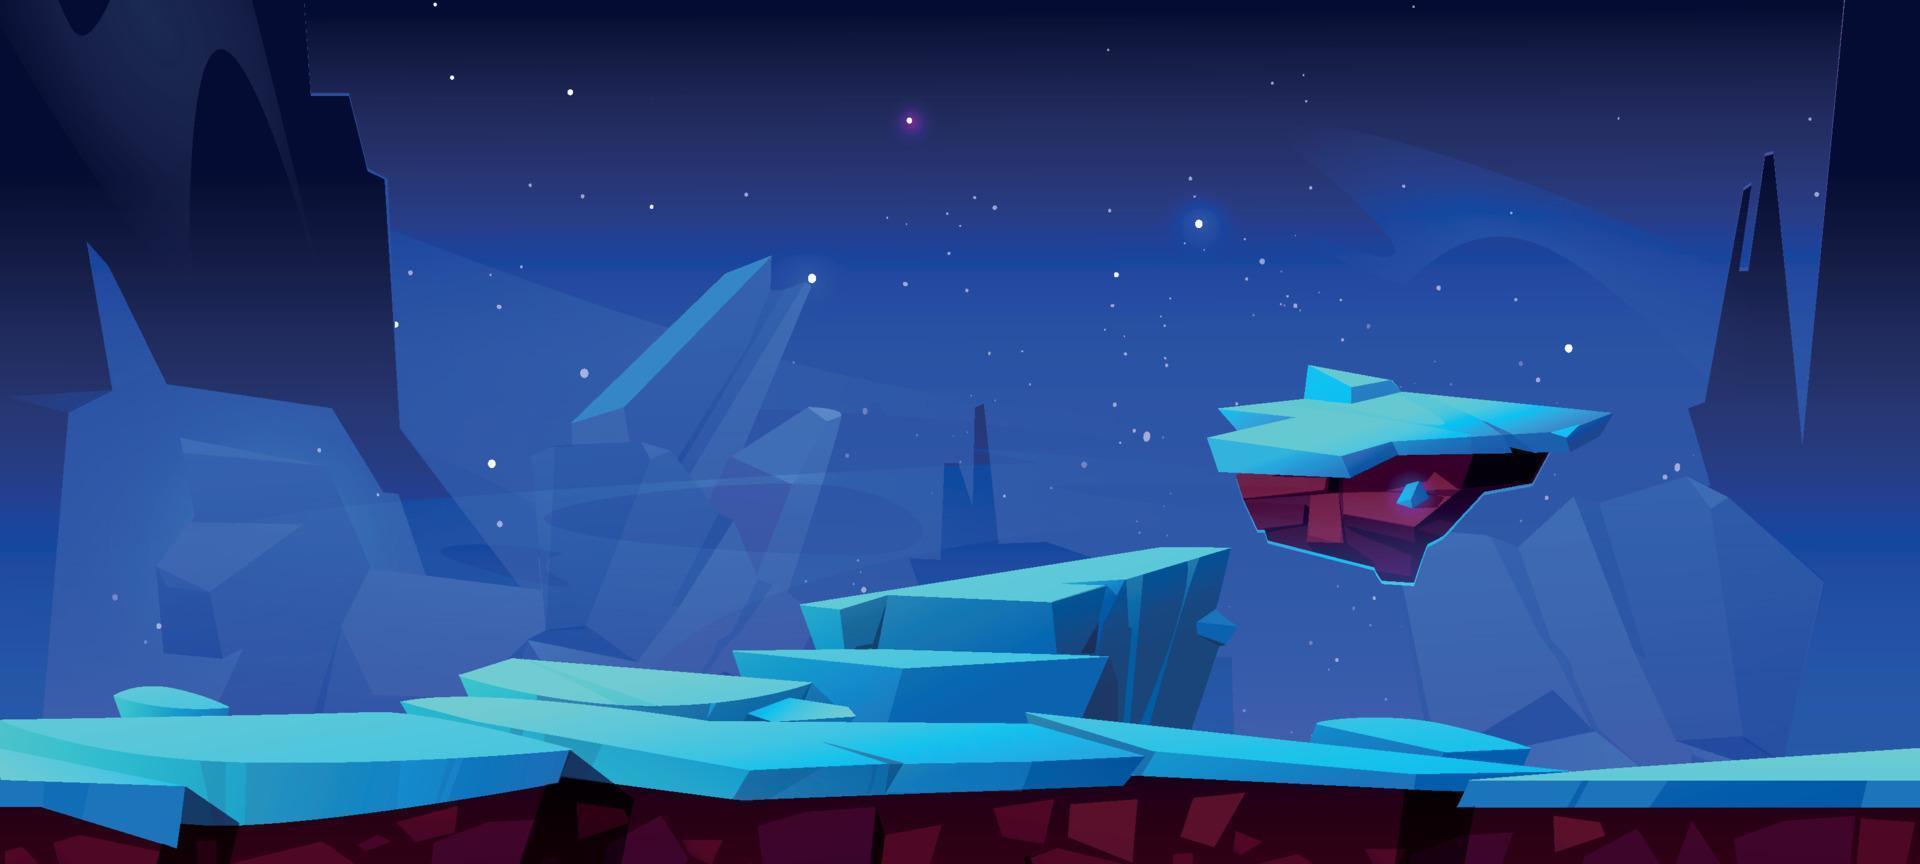 Alien planet landscape with ice and flying islands vector